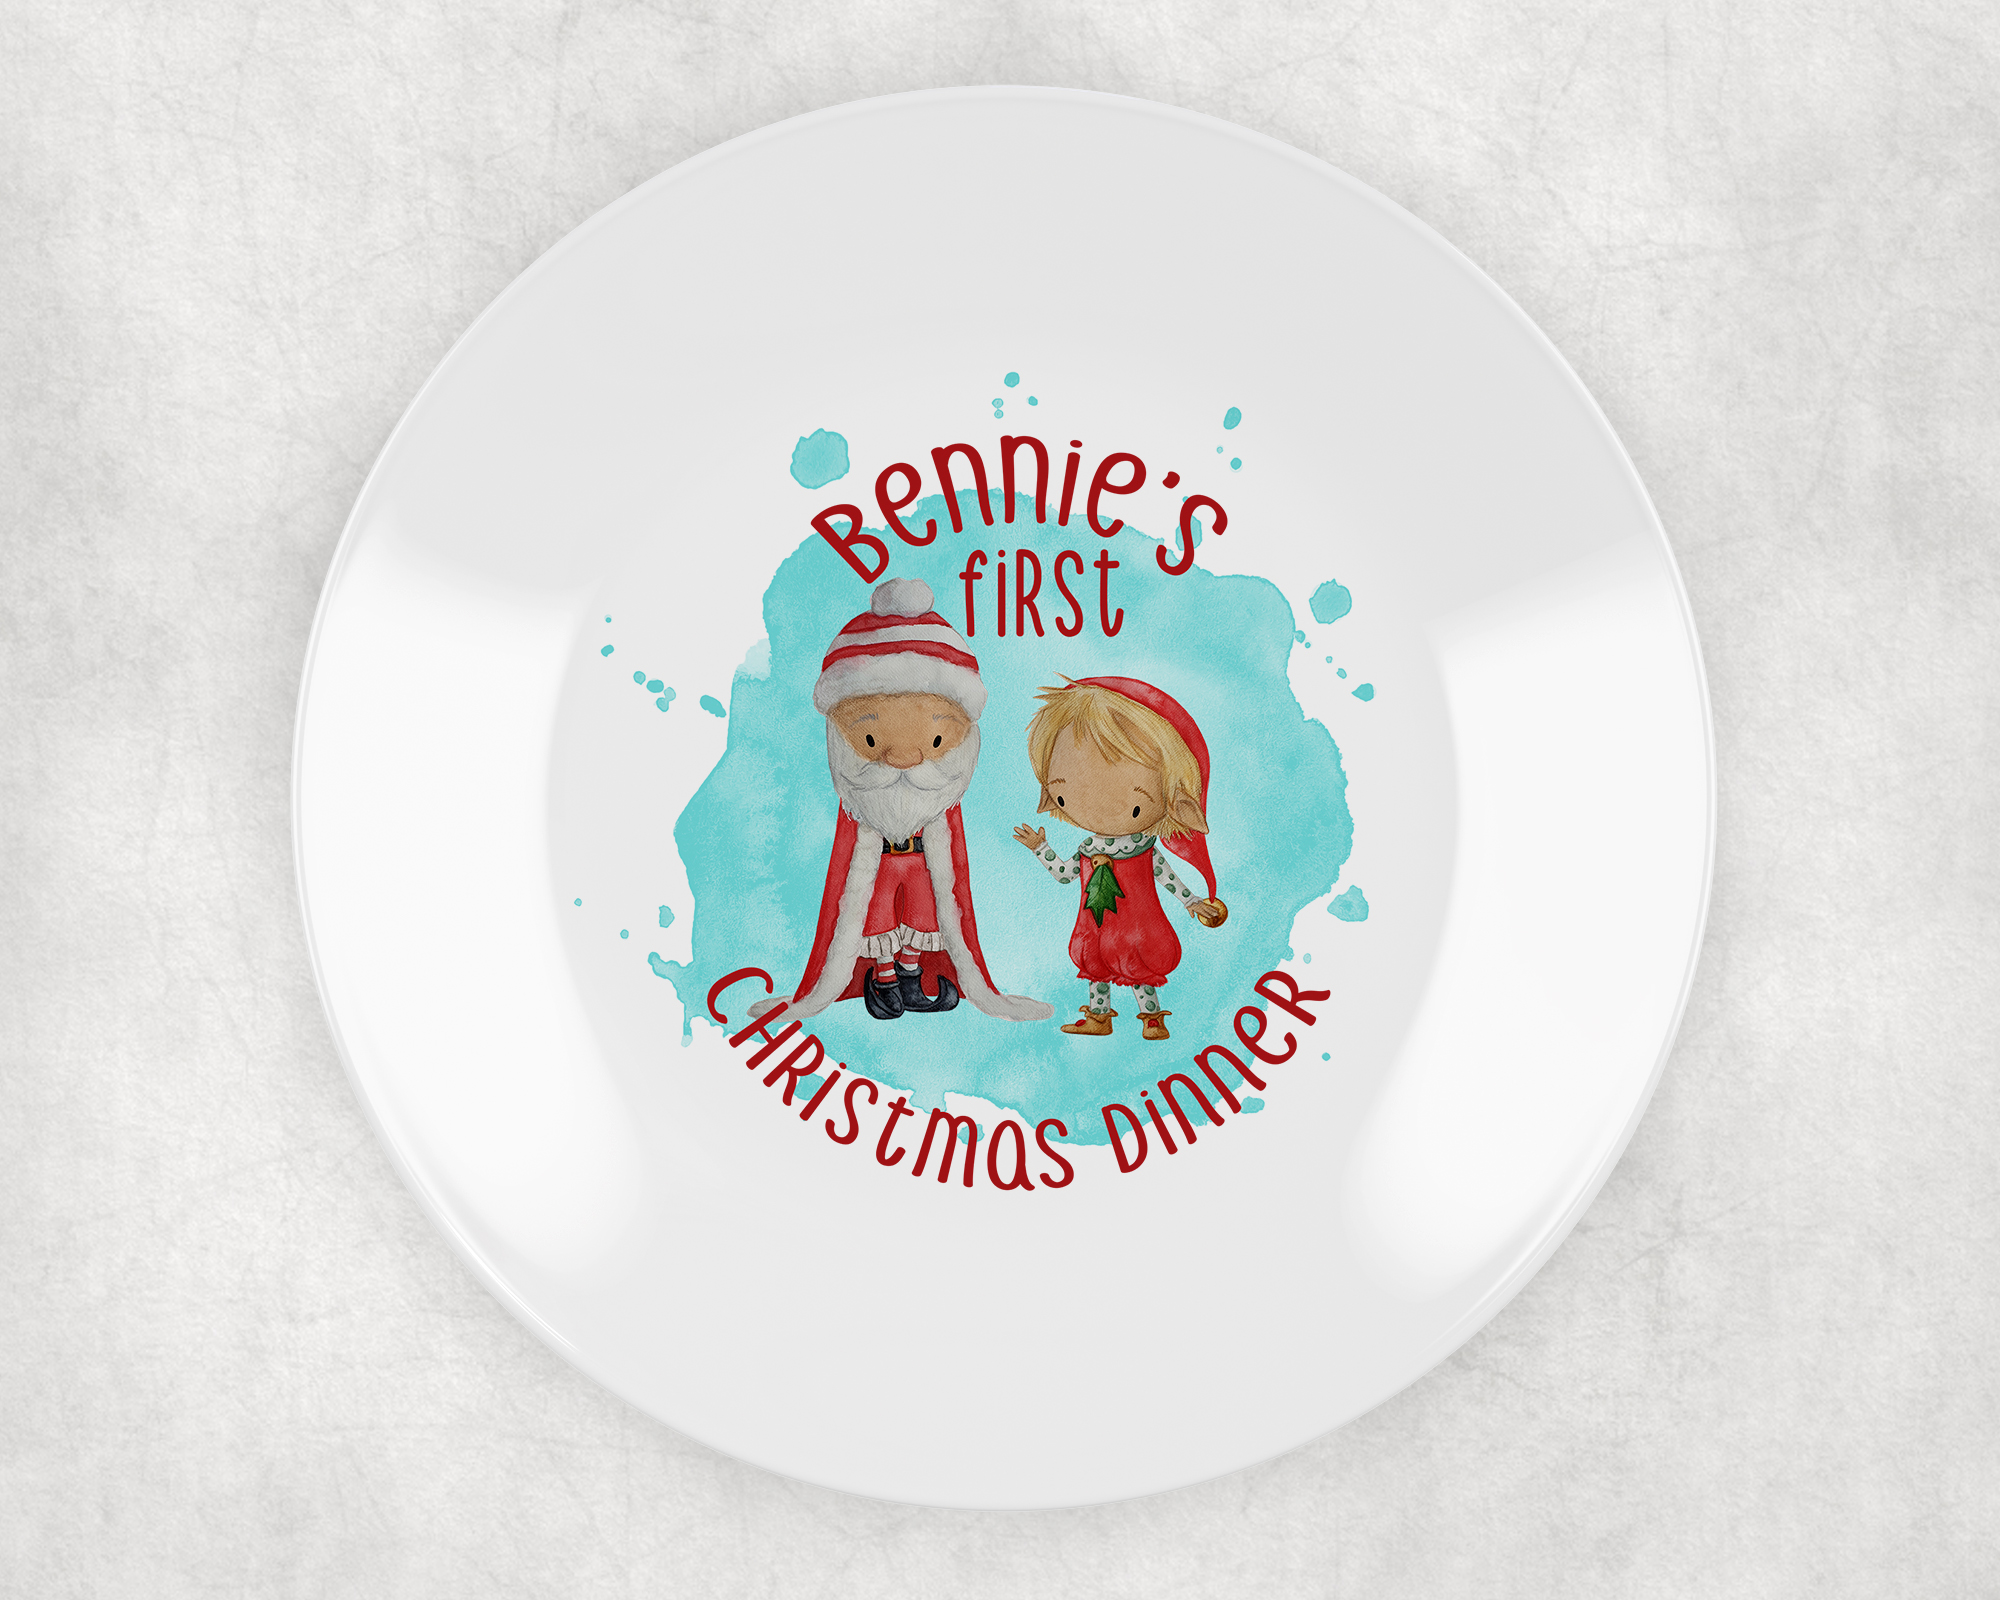 my first christmas plate personalised with santa and elf. ideal plastic non breakable plate. santa boy elf blond hair blue background